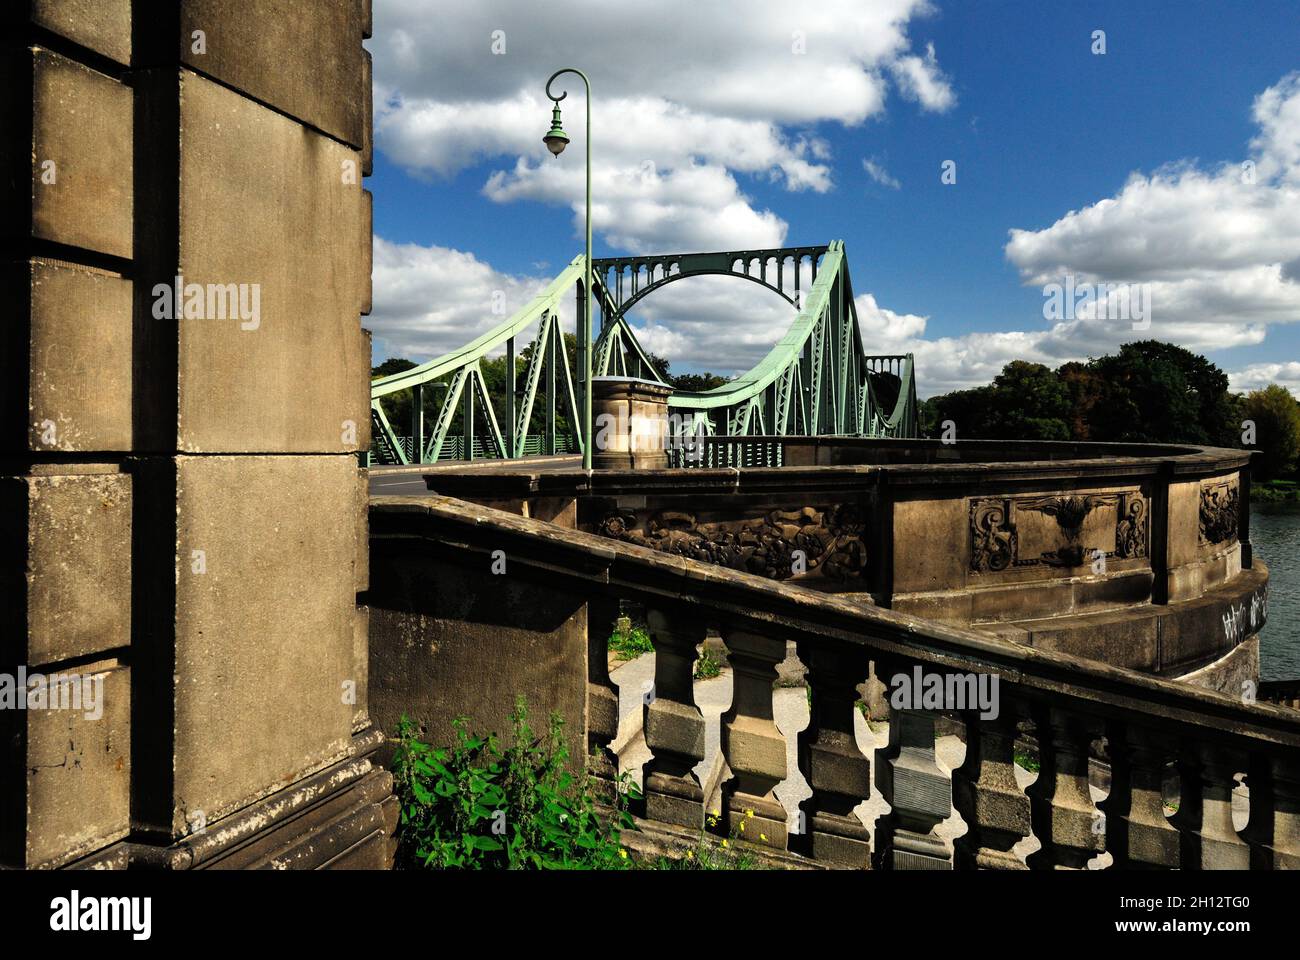 Potsdam,Glinicker Bridge,The bridge is a Cold War symbol; the border between West Berlin and the Soviet Zone bisected the structure,the fall of the Berlin Wall in November 1989,photo Kazimierz Jurewicz, Stock Photo